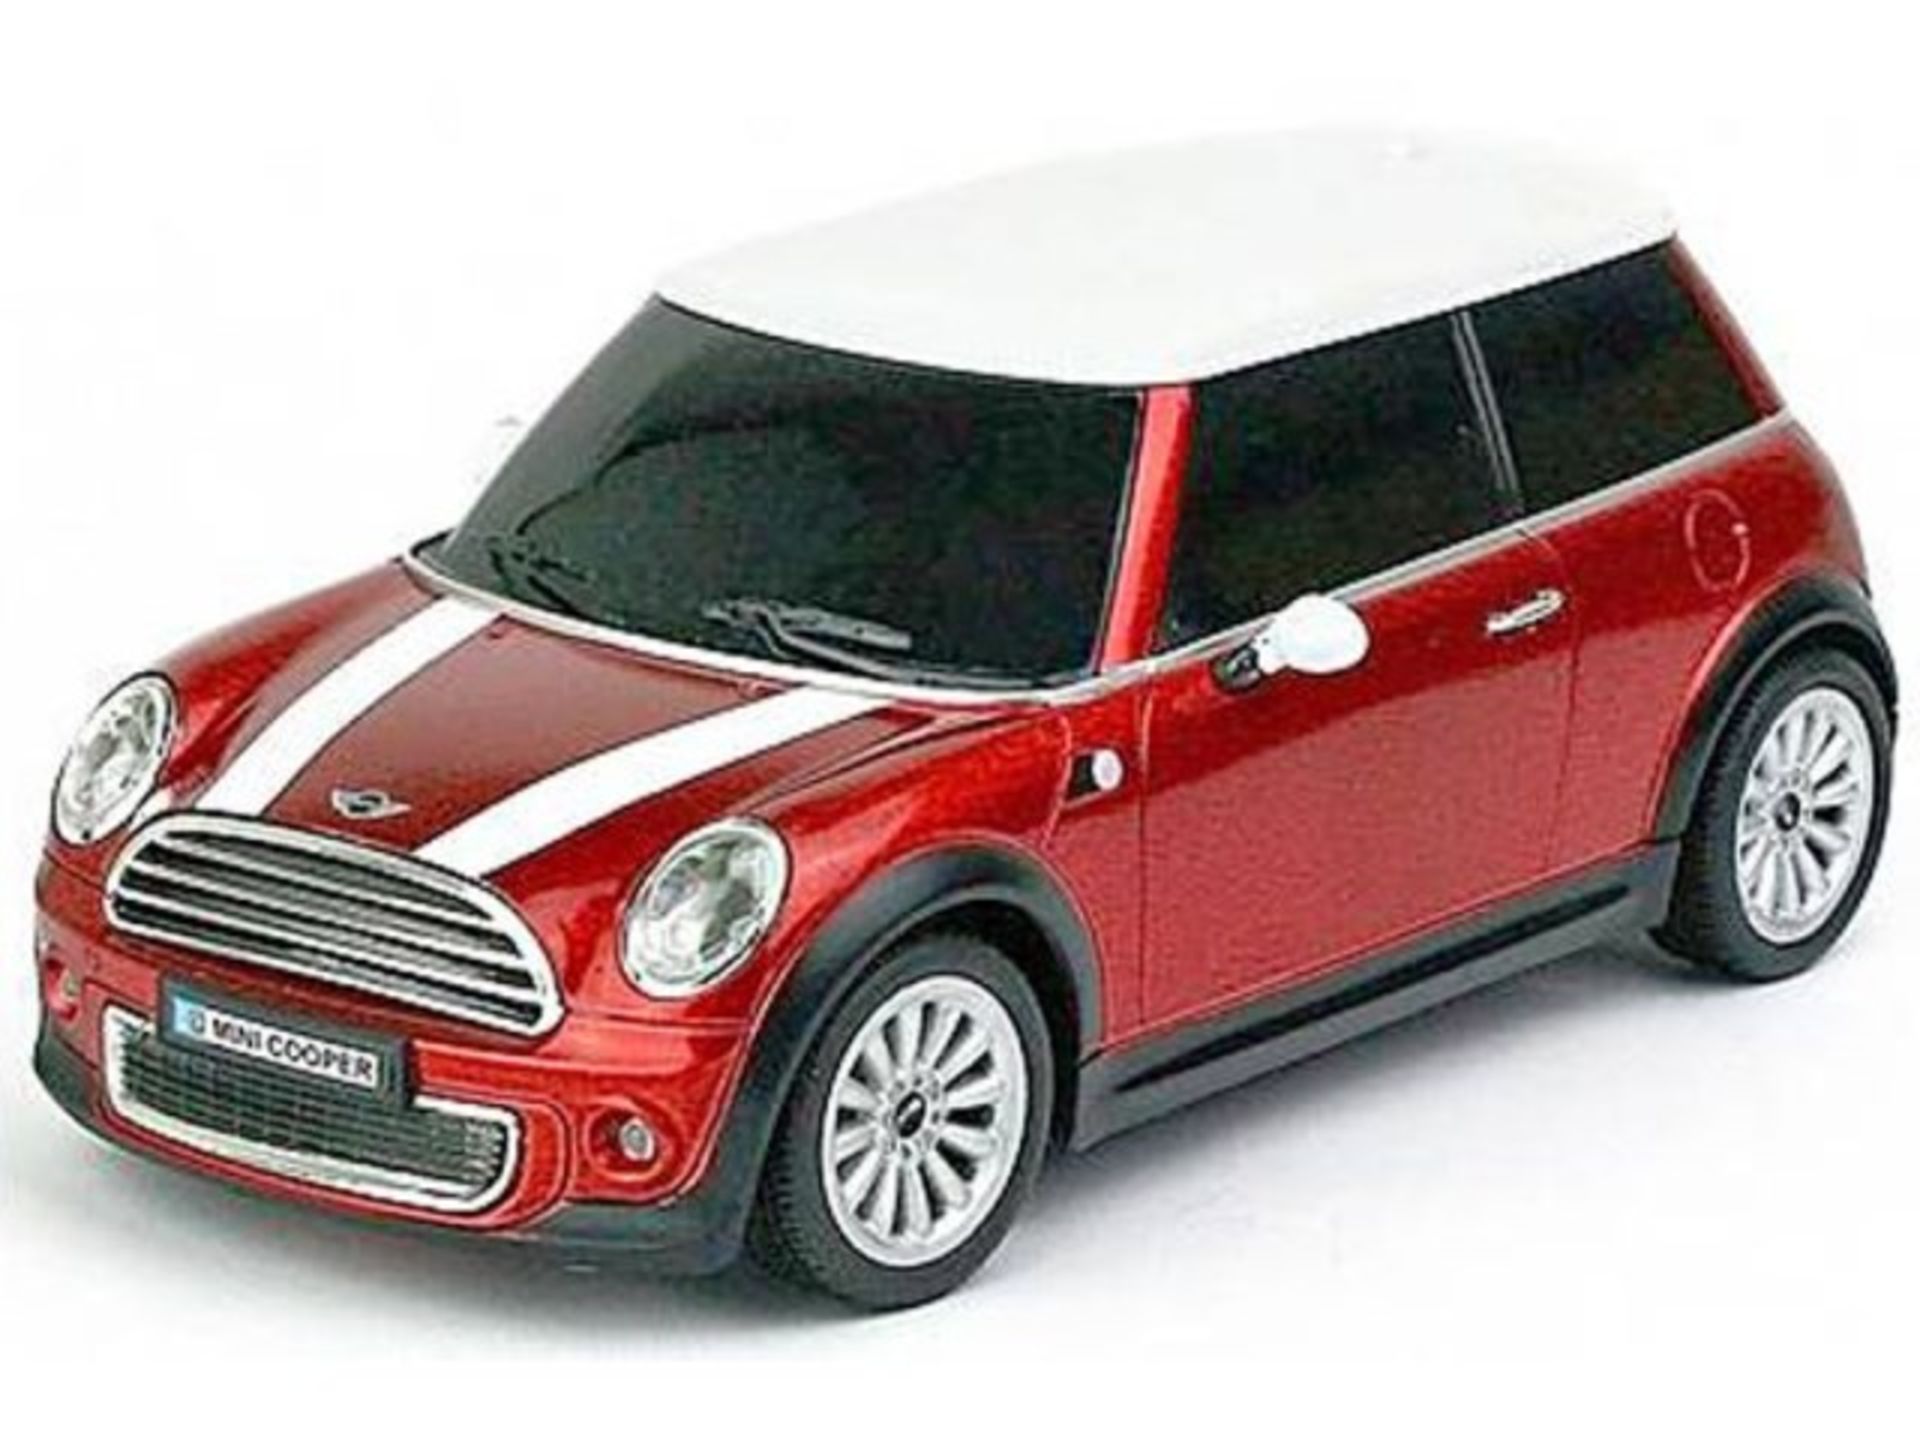 V *TRADE QTY* Brand New 1:14 Scale R/C Mini Cooper S In Red Officially Licensed Product X 5 YOUR BID